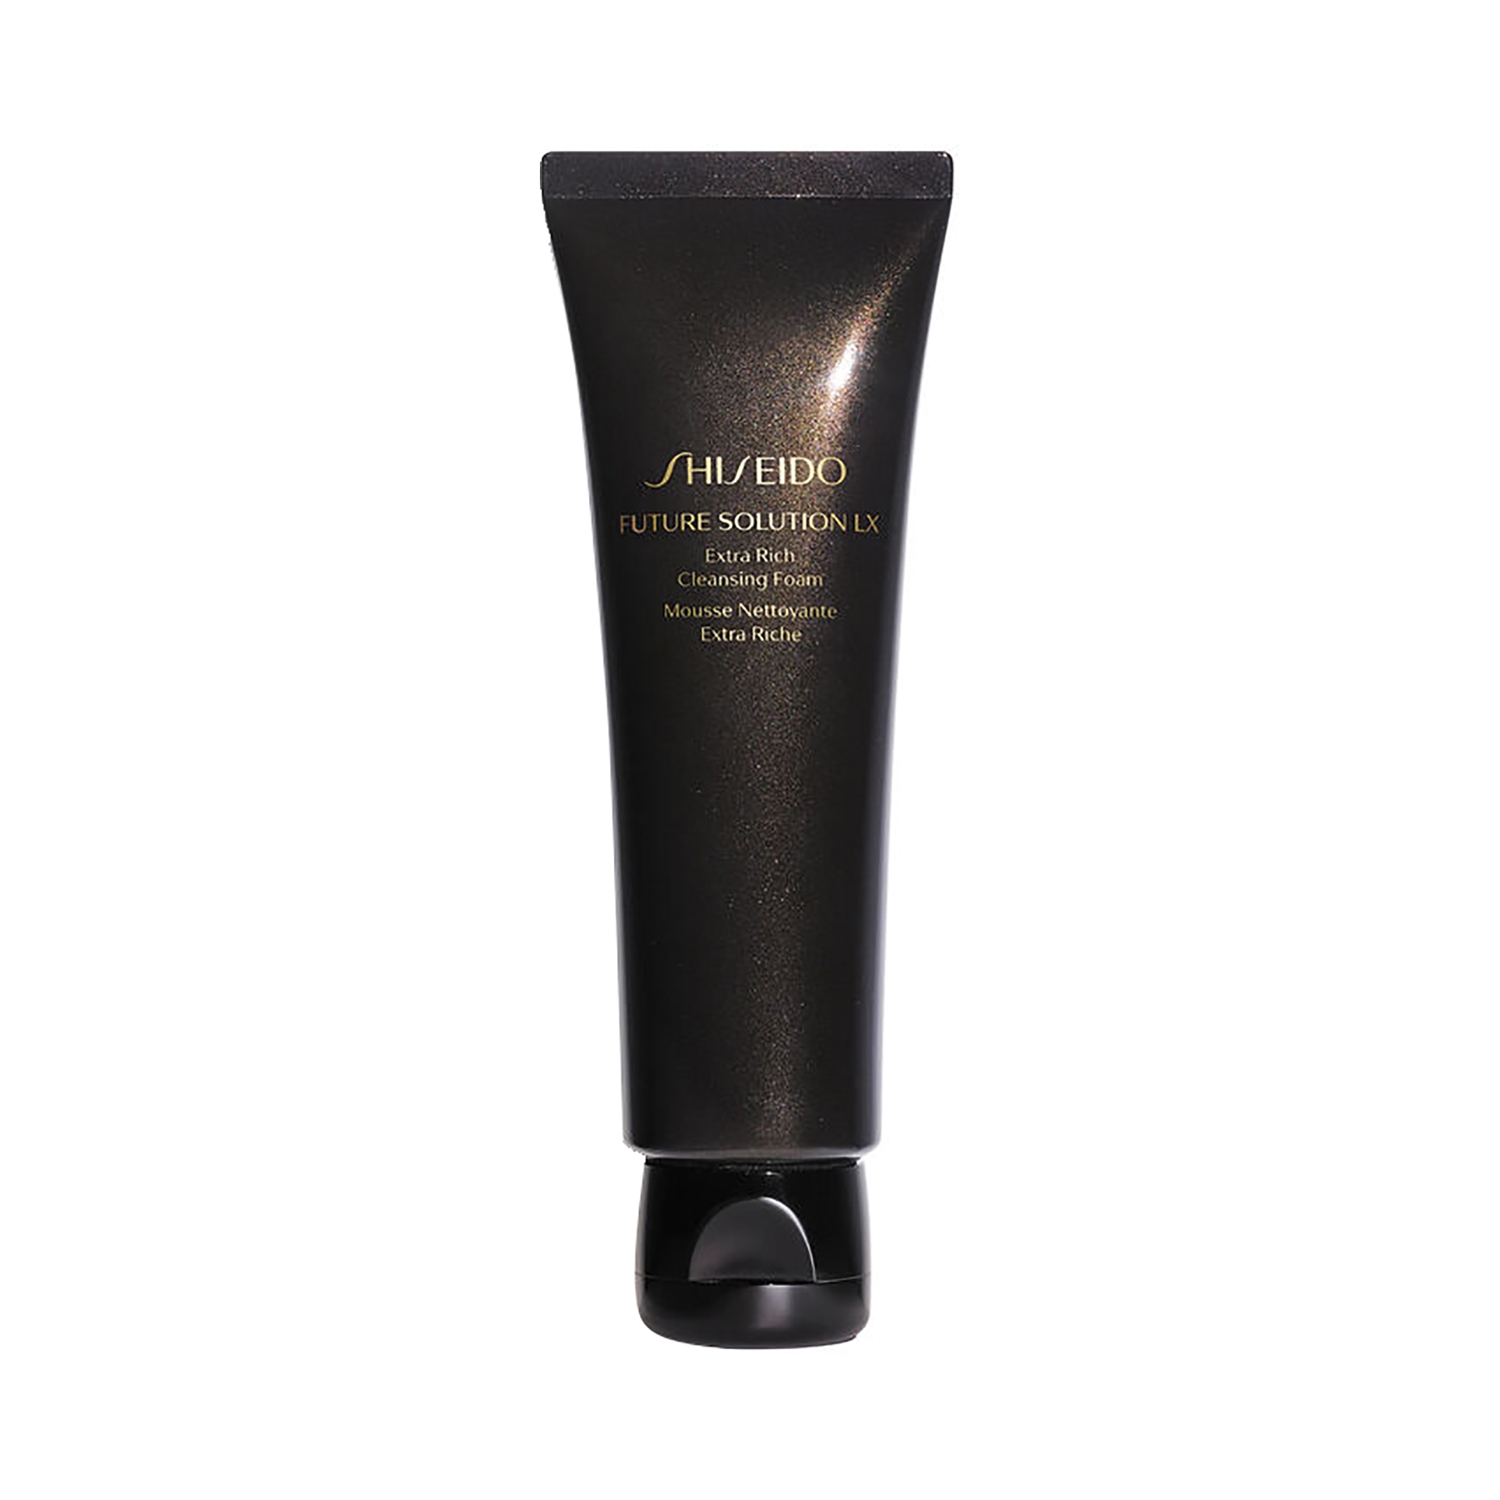 Shiseido Future Solution Lx Extra Rich Cleansing Foam (125ml)